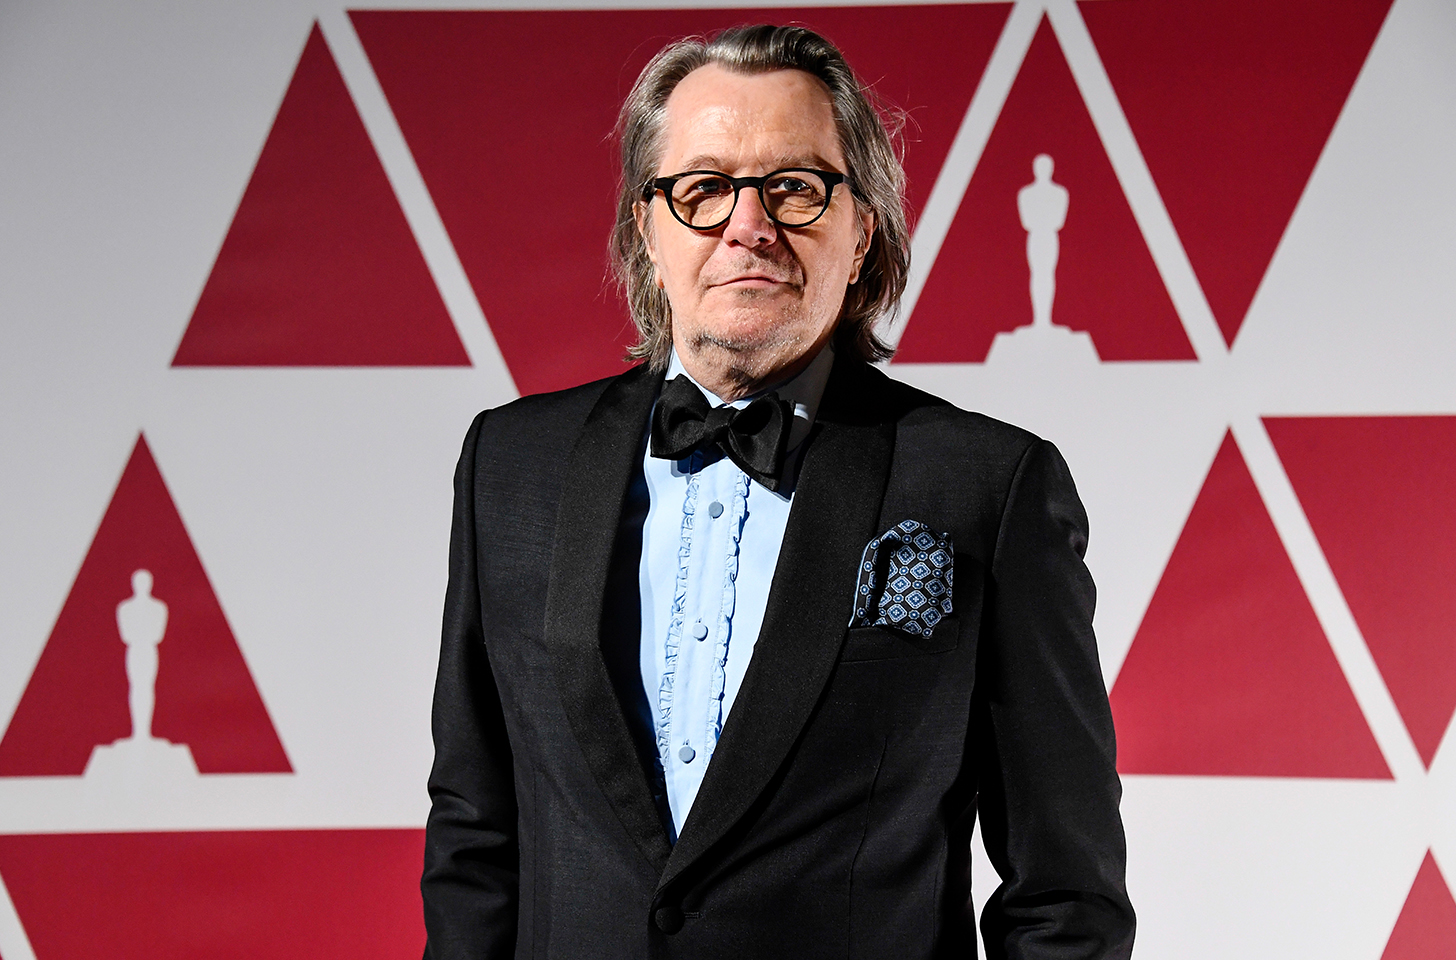 Gary Oldman wearing a black suit and black bow tie